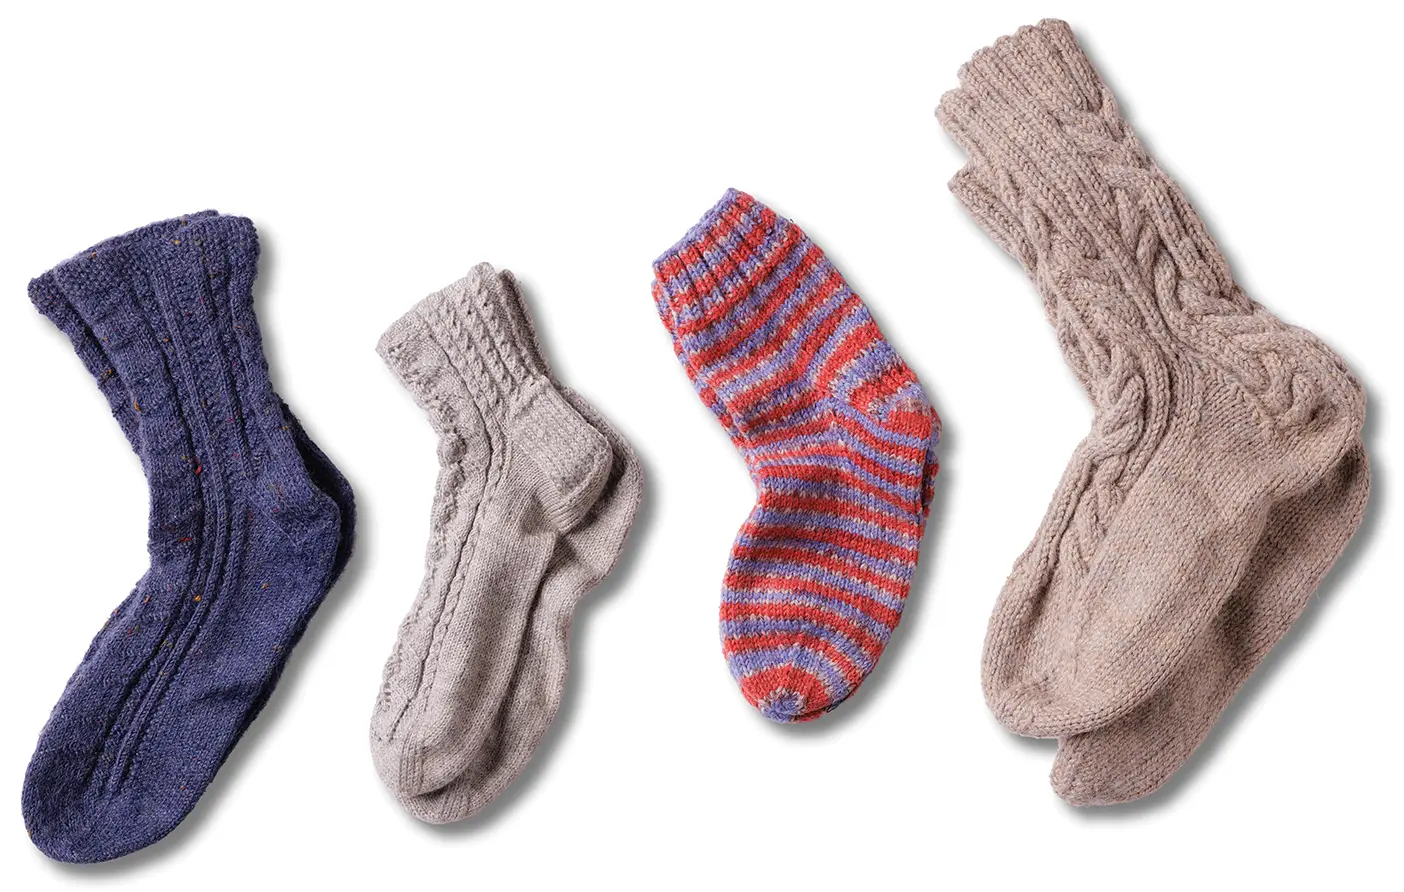 Assortment of hand-knitted woolen socks with cabled designs. 